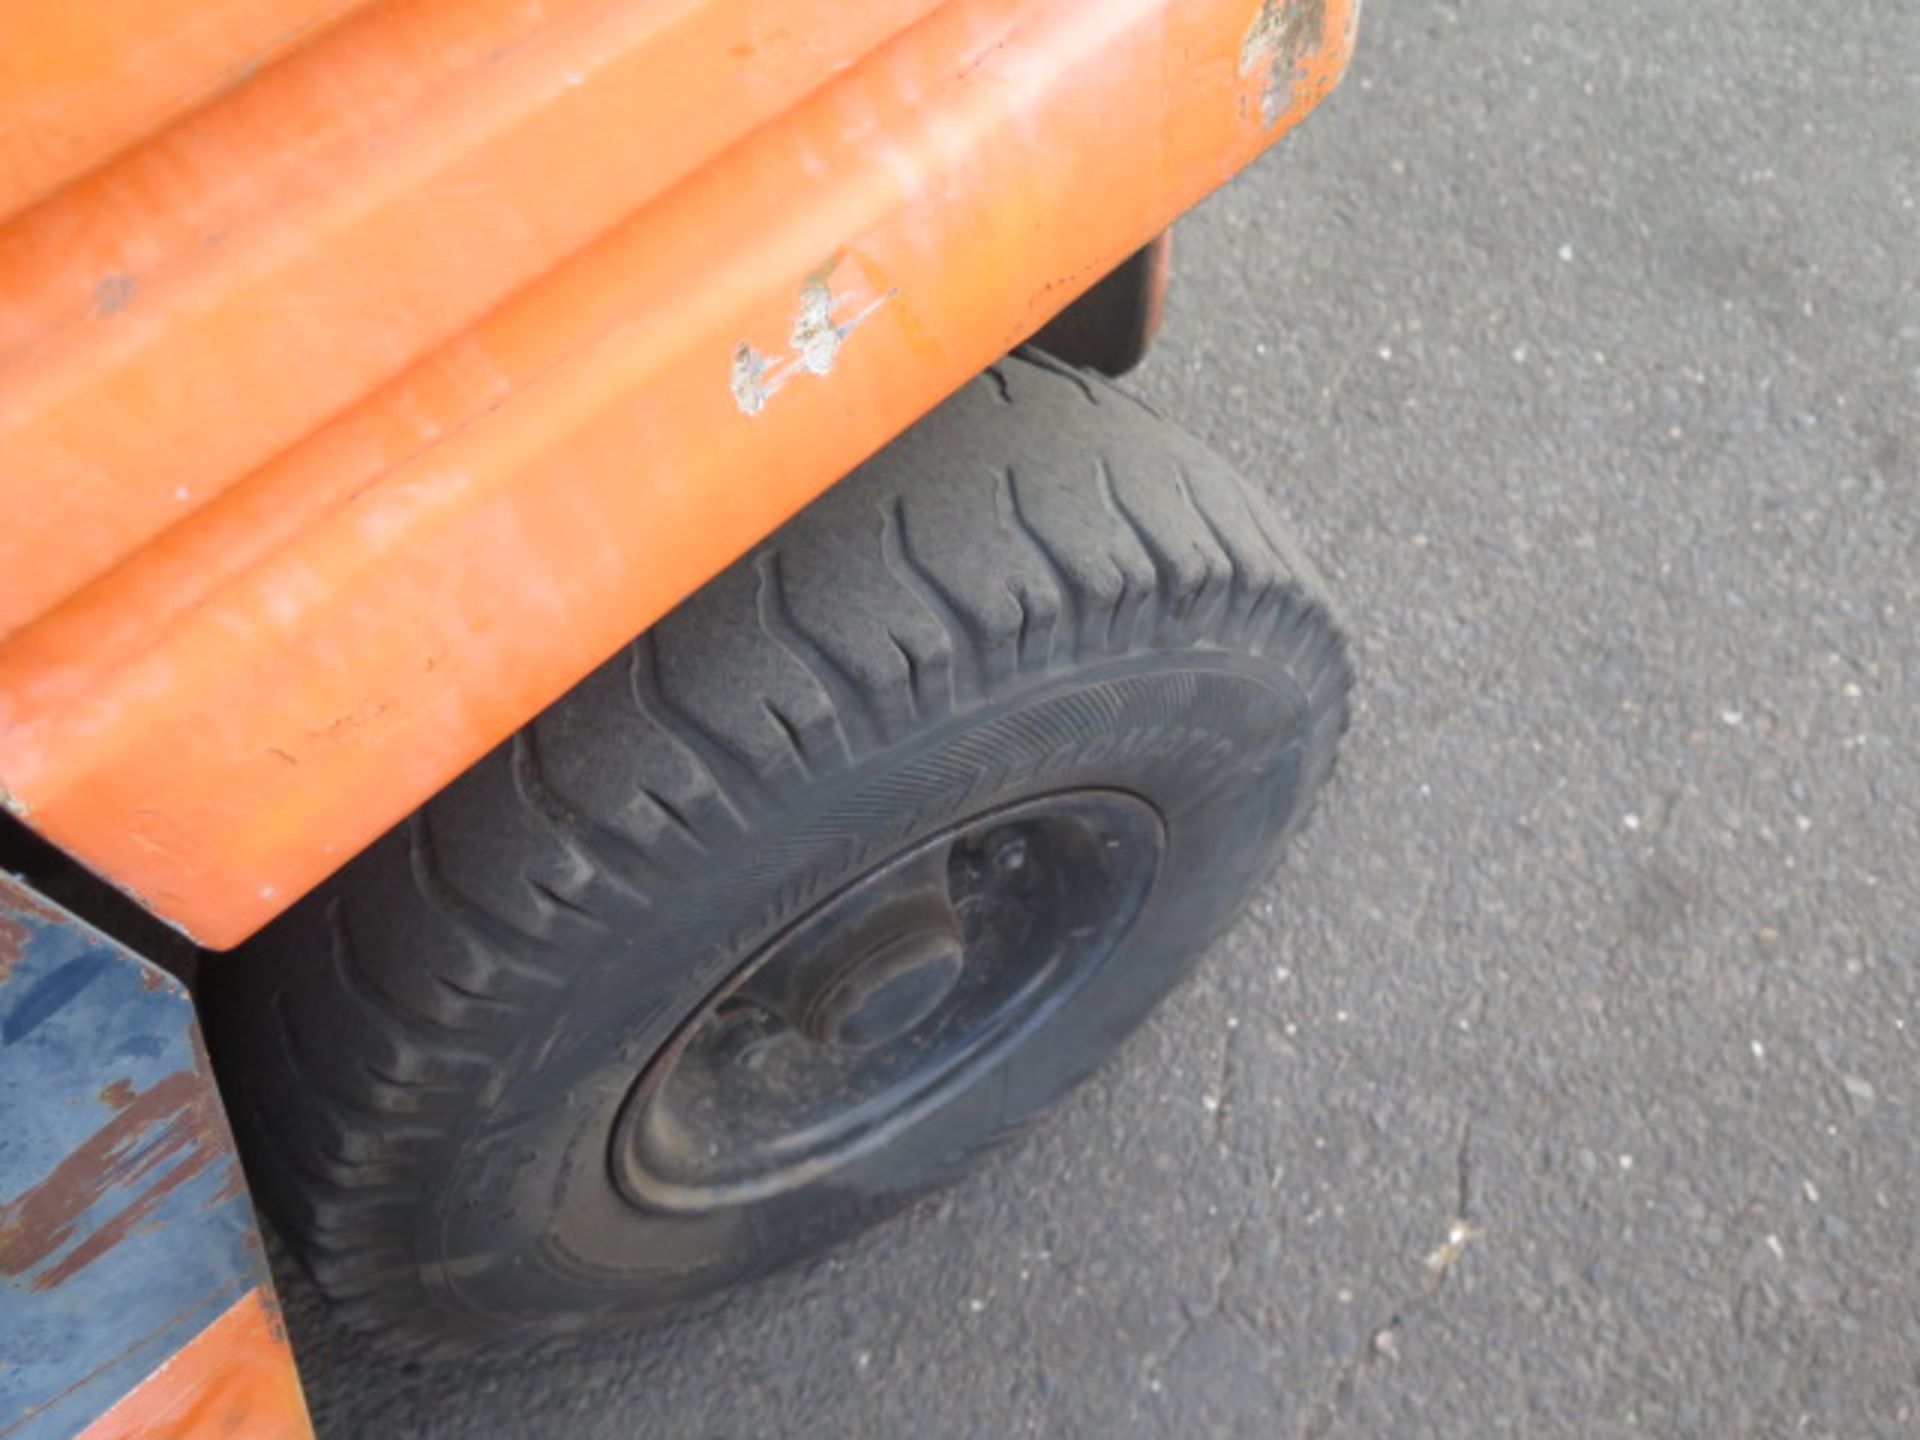 Toyota 02-5FGC30 5800 Lb Cap LPG Forklift s/n 5FGC30-11577 w/ 3-Stage Mast, Side Shift, SOLD AS IS - Image 7 of 11